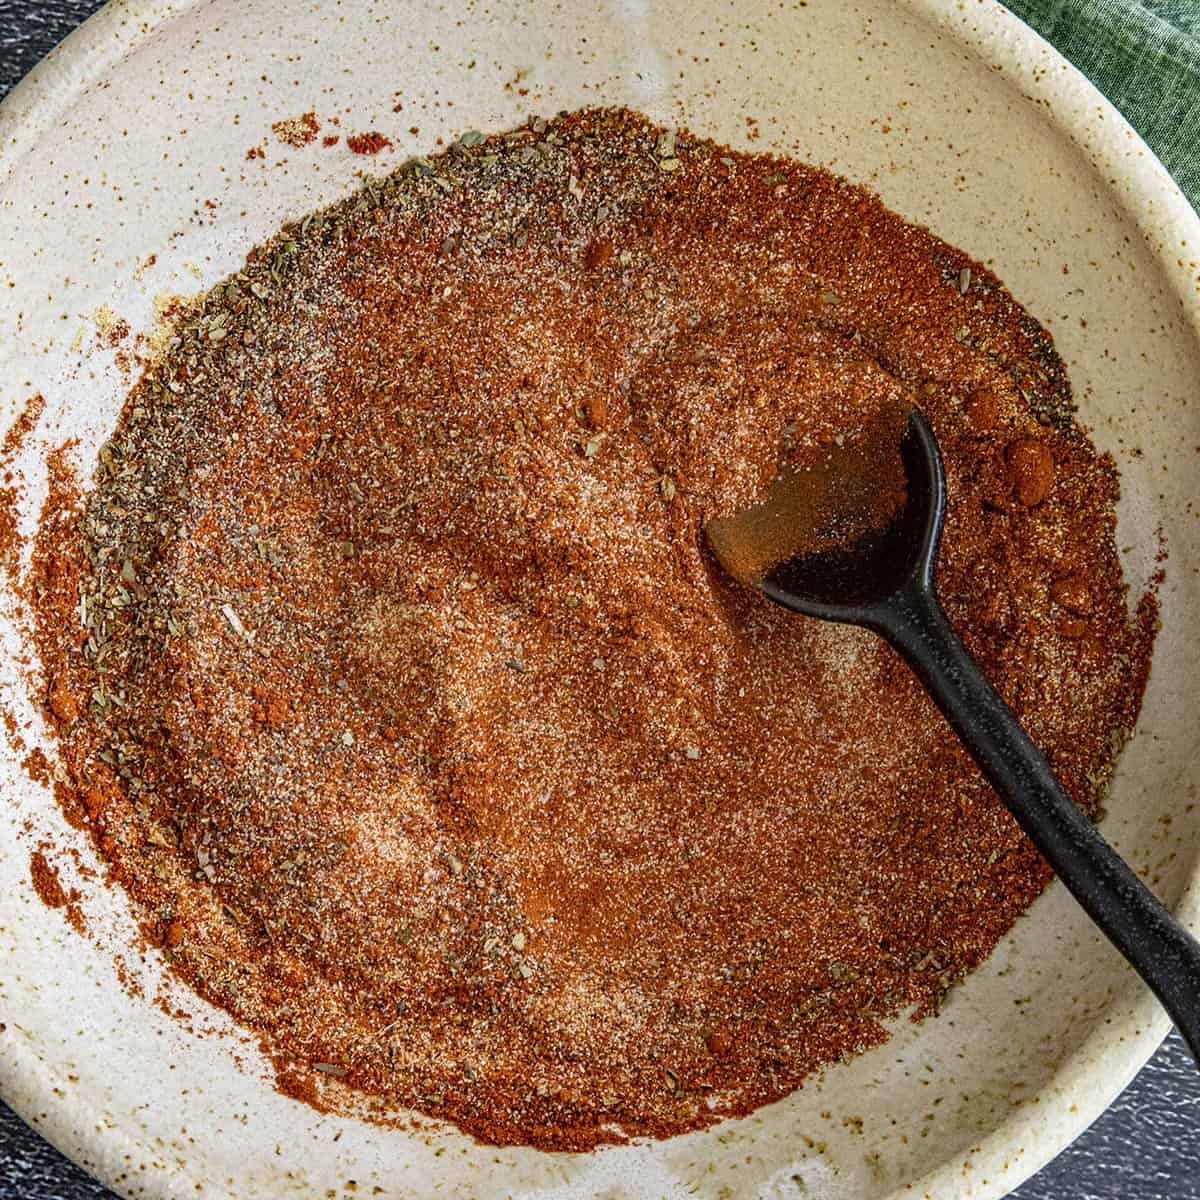 13 Common Spices You Can (Cannot) Grind in Your Salt and Pepper